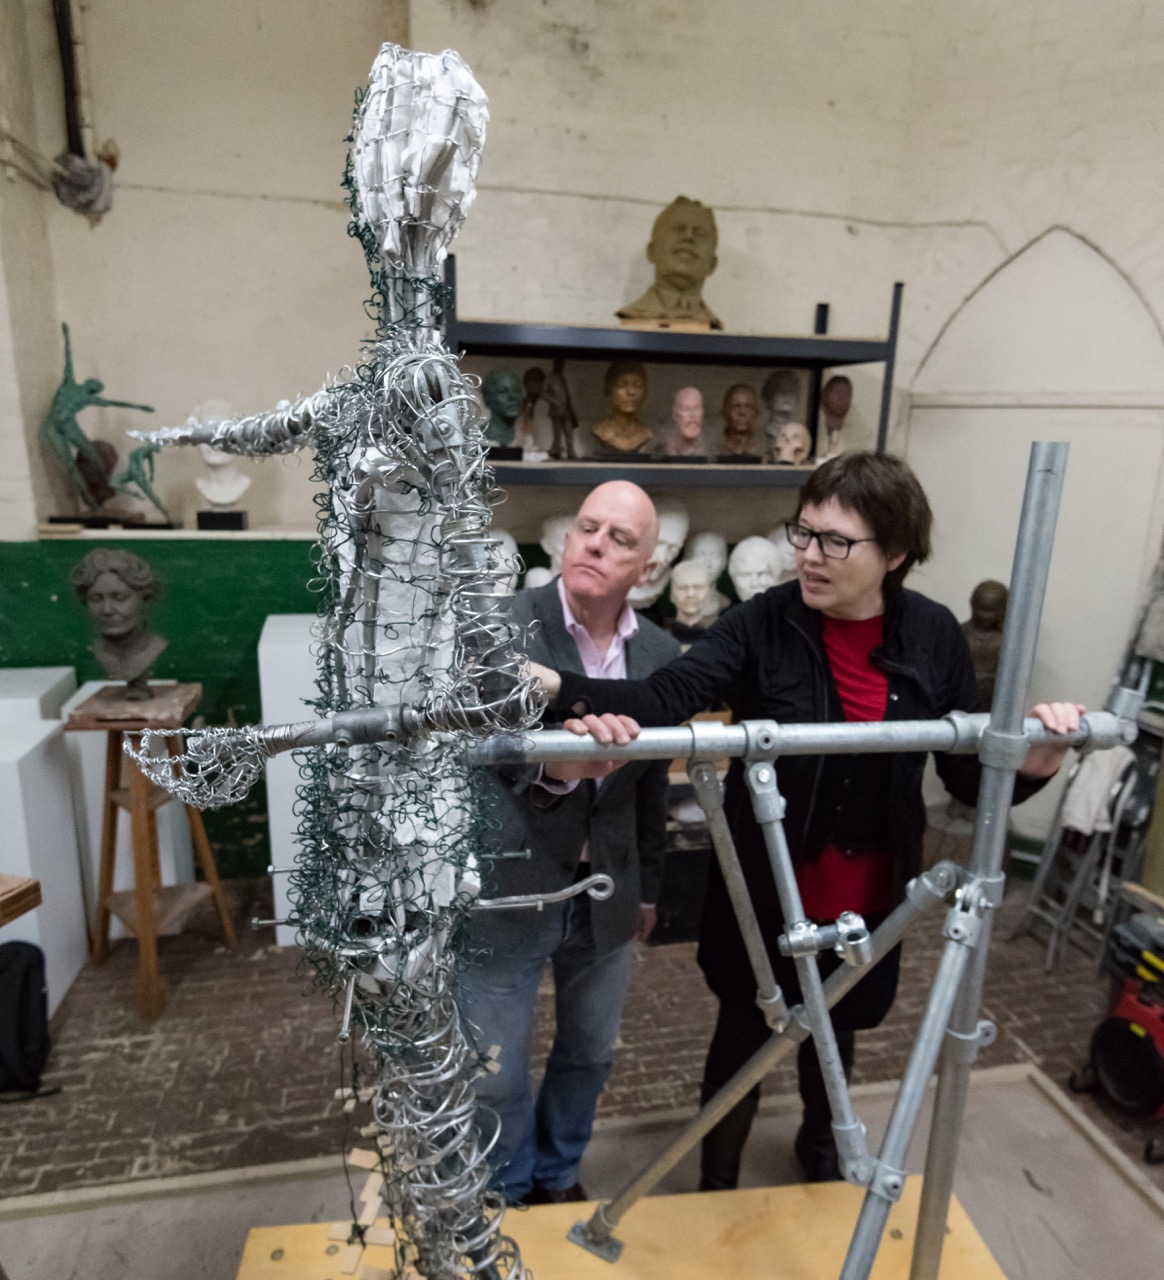 Hazel and Andrew inspect the Our Emmeline armature - photo by Nigel Kingston